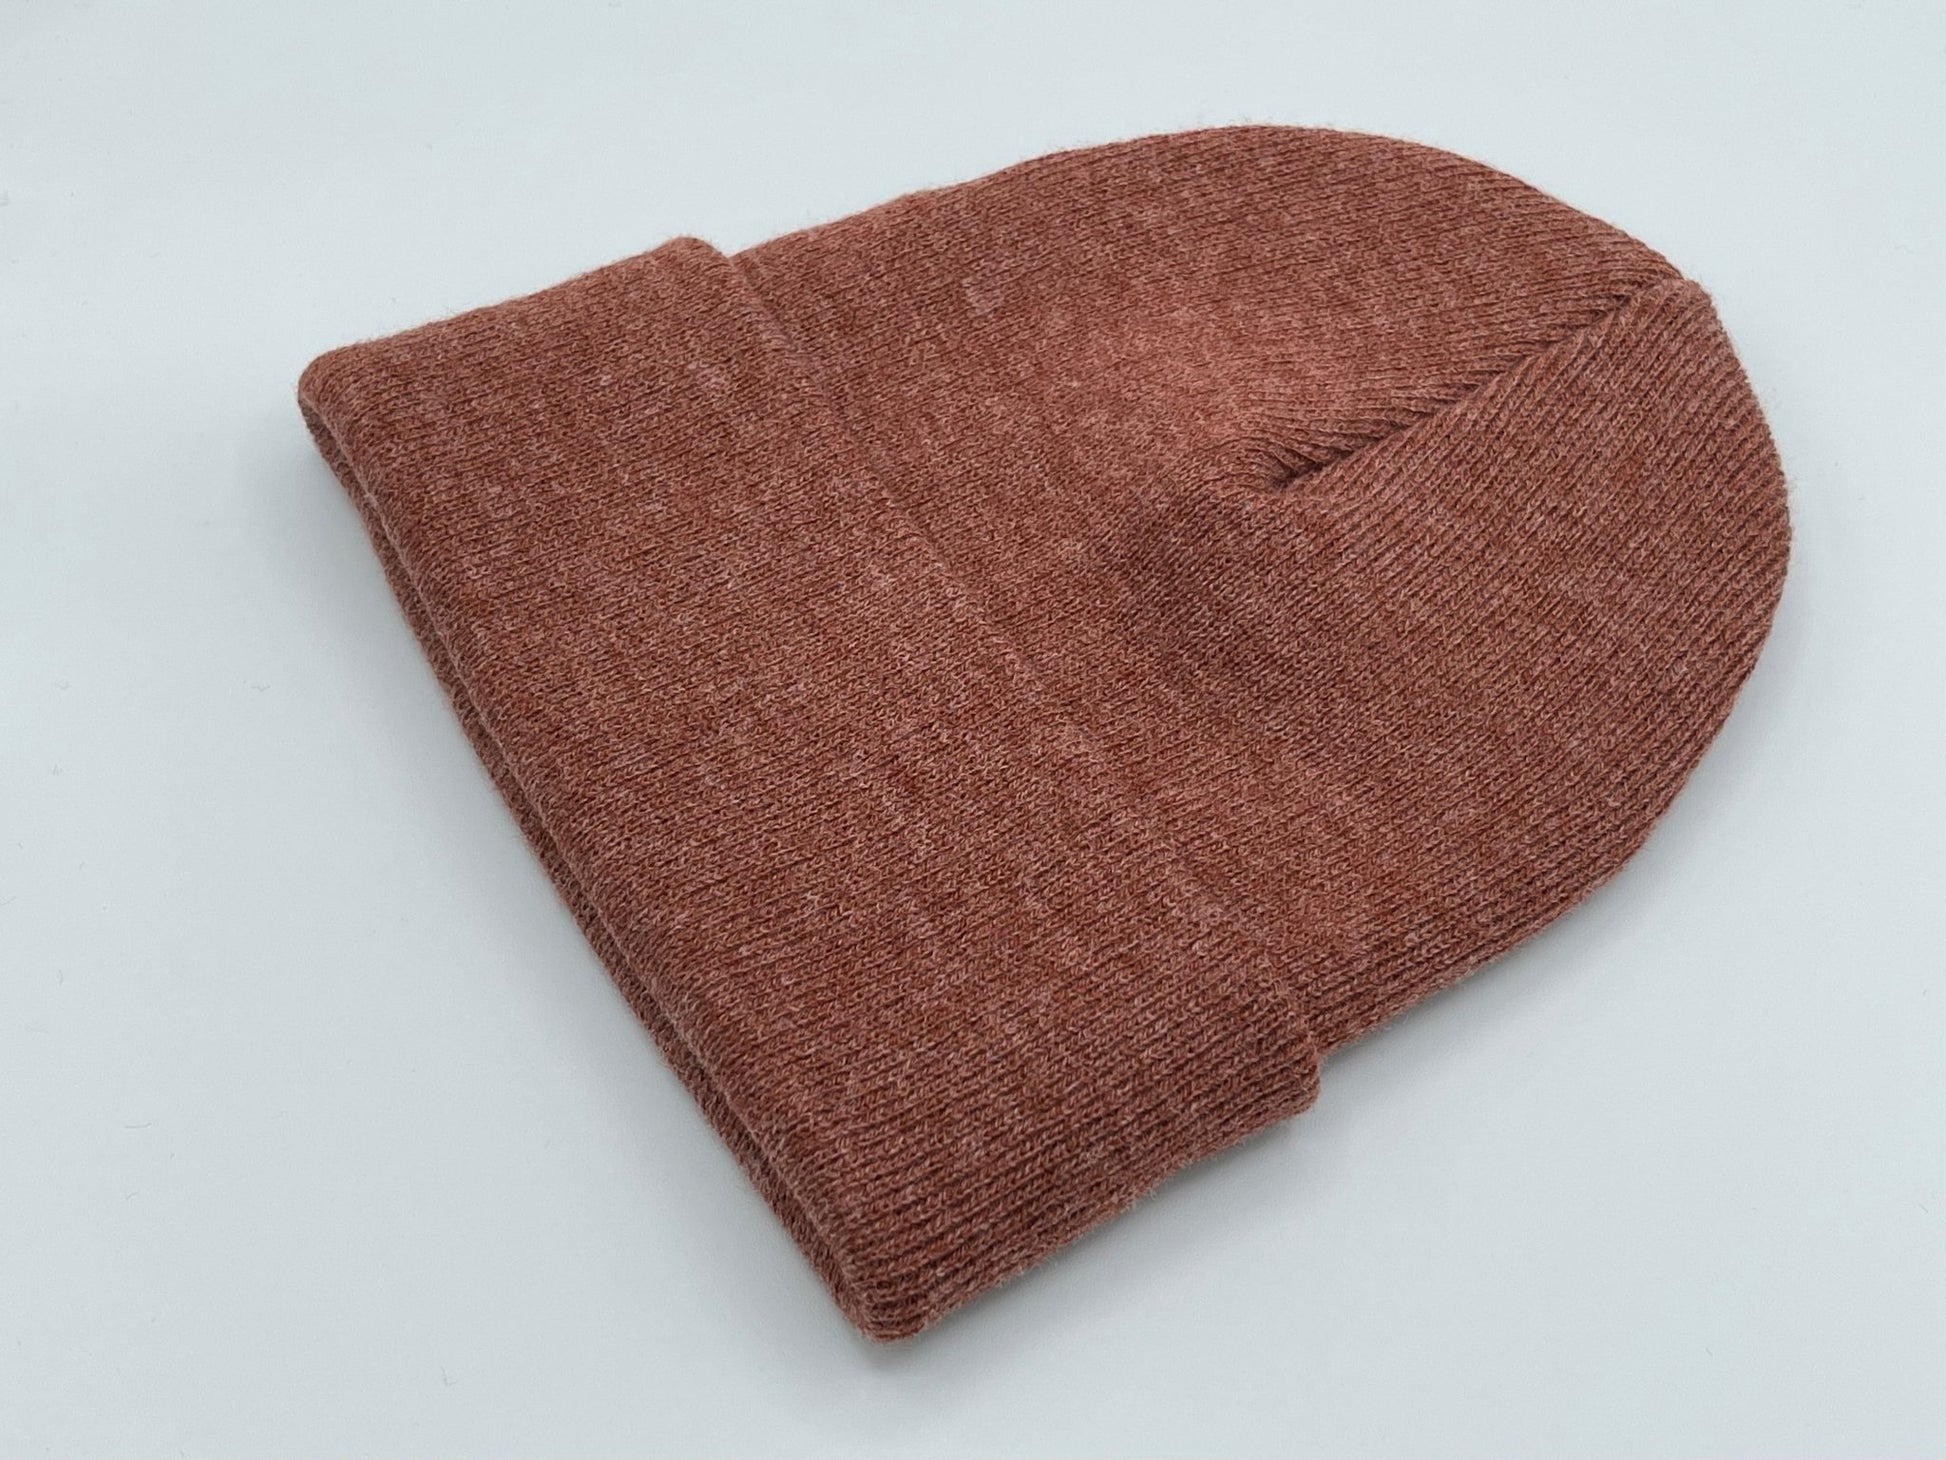 Blank Beanie Factory Cuffed Winter Hat, Wholesale price, Premium Quality, Burgundy, Made in U.S.A - The Beanie Factory